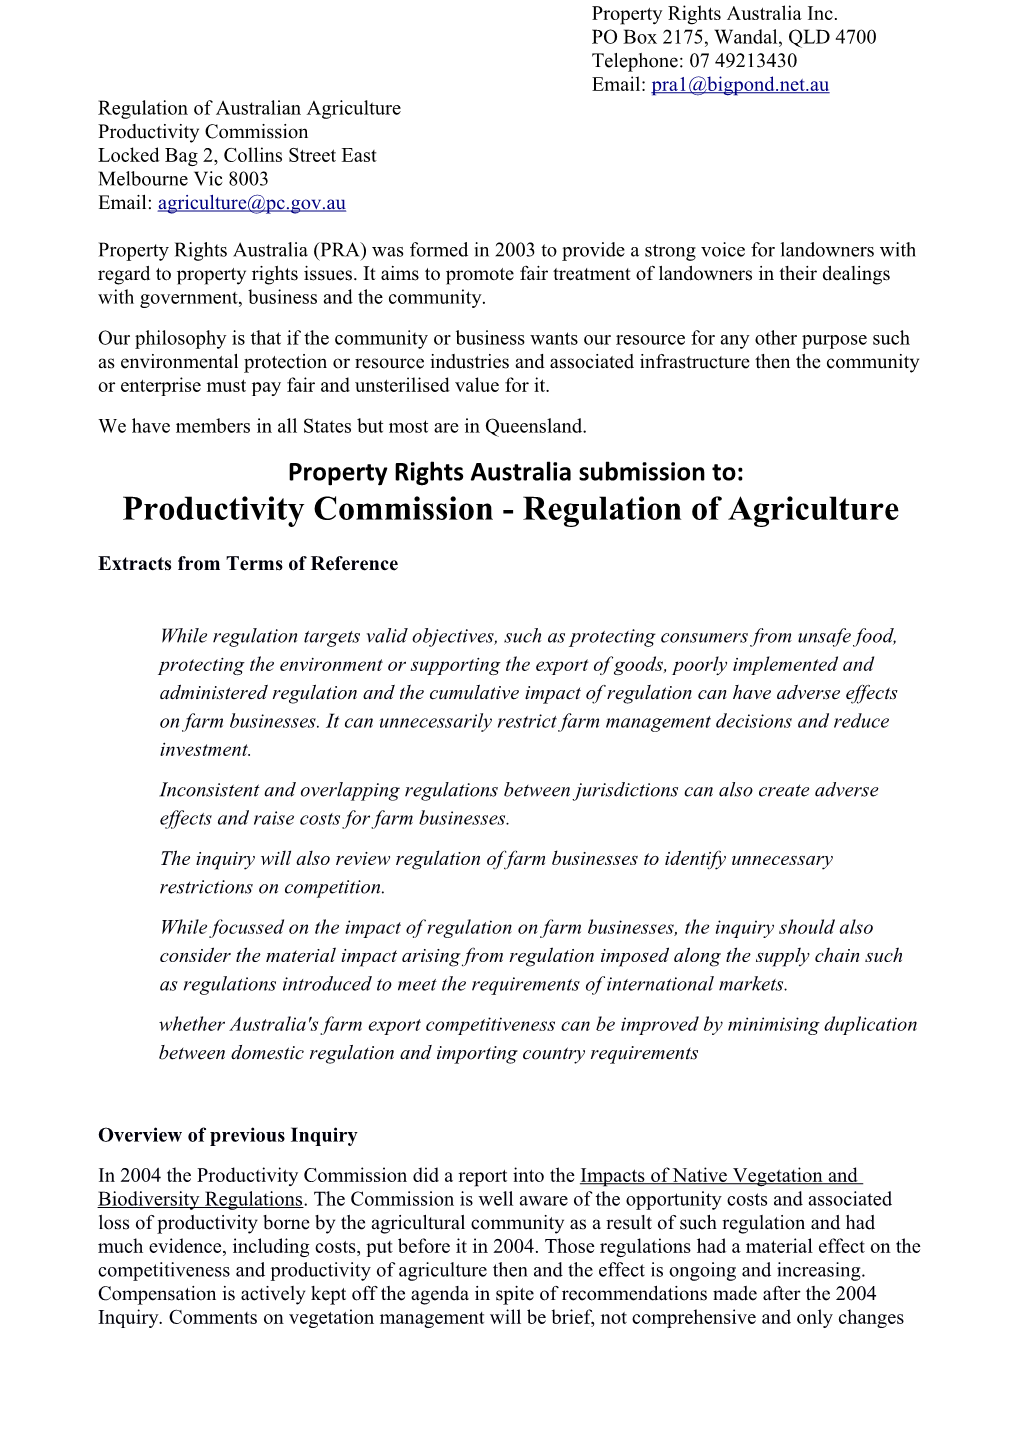 Submission 45 - Property Rights Australia - Regulation of Agriculture - Public Inquiry